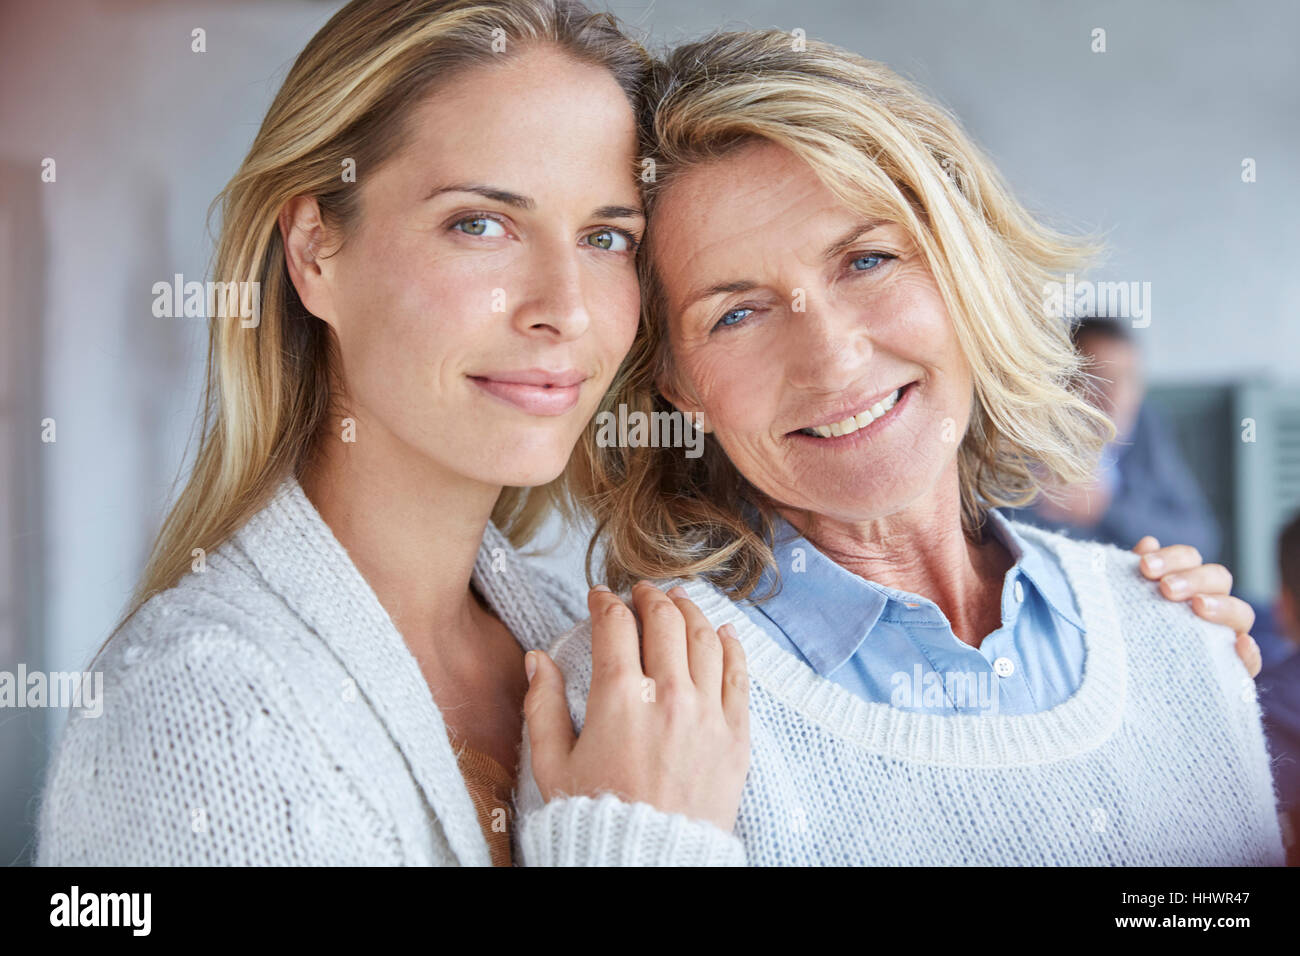 Portrait of smiling mother and daughter Banque D'Images